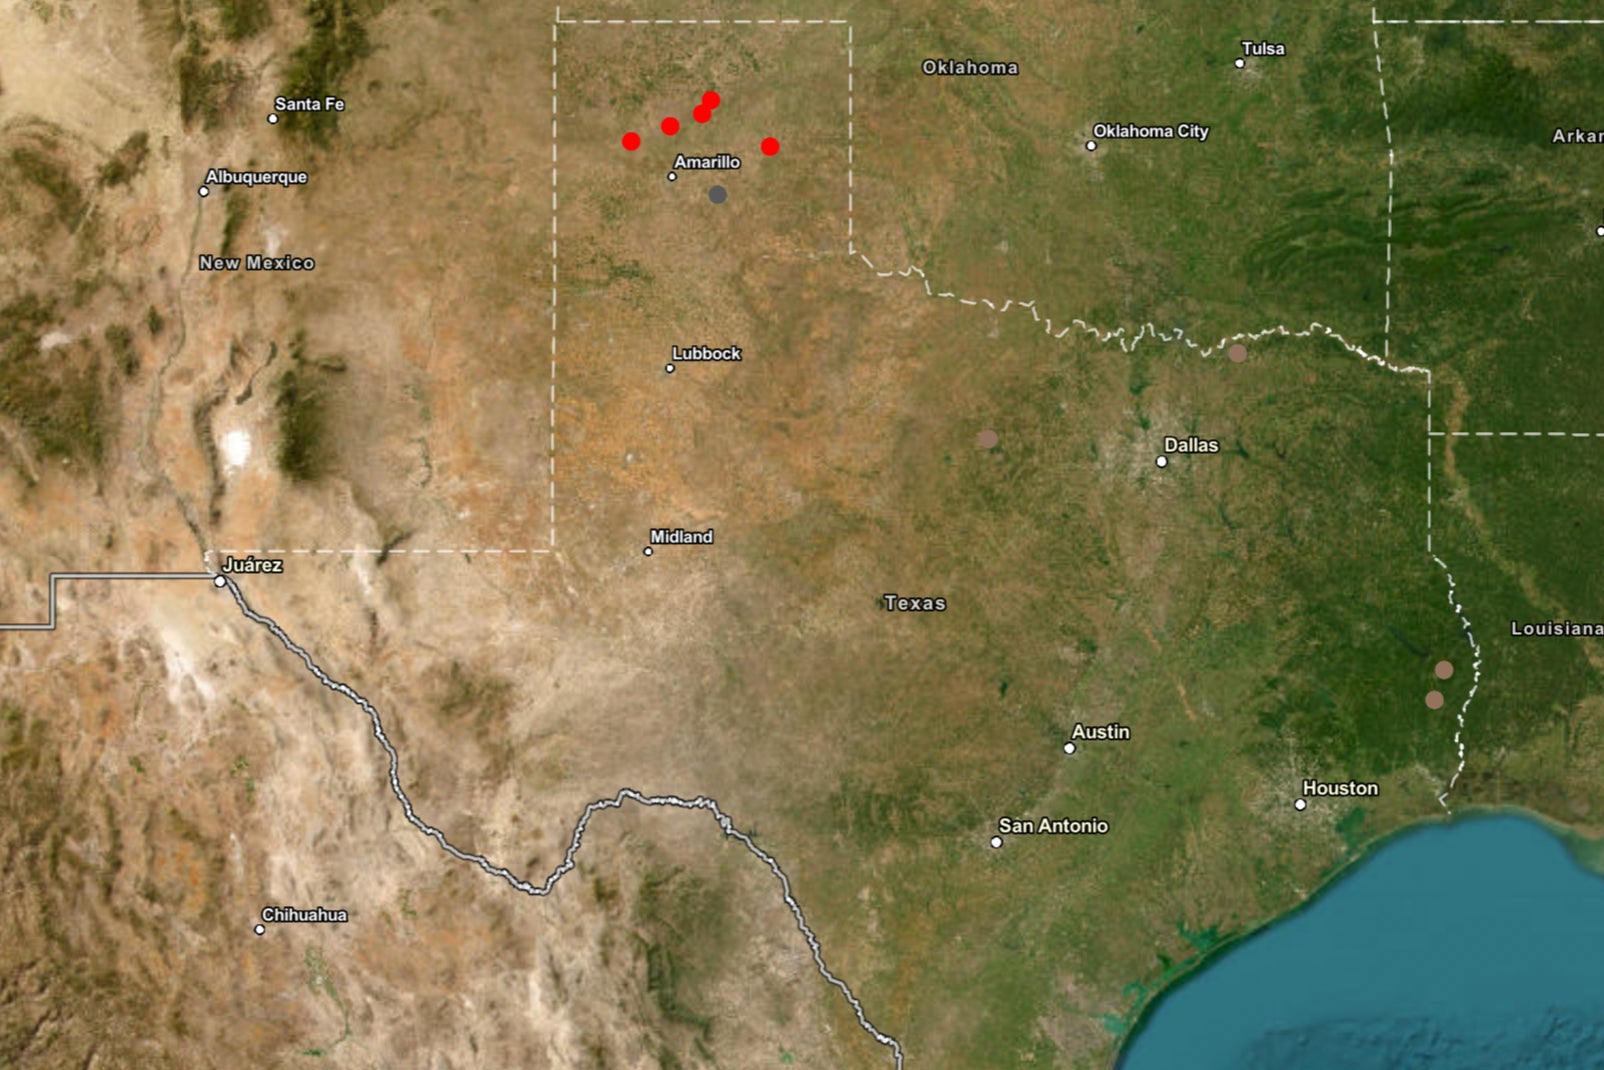 A map of Texas with red dots representing active fires, grey dots representing controlled fires and brown dots representing contained fires